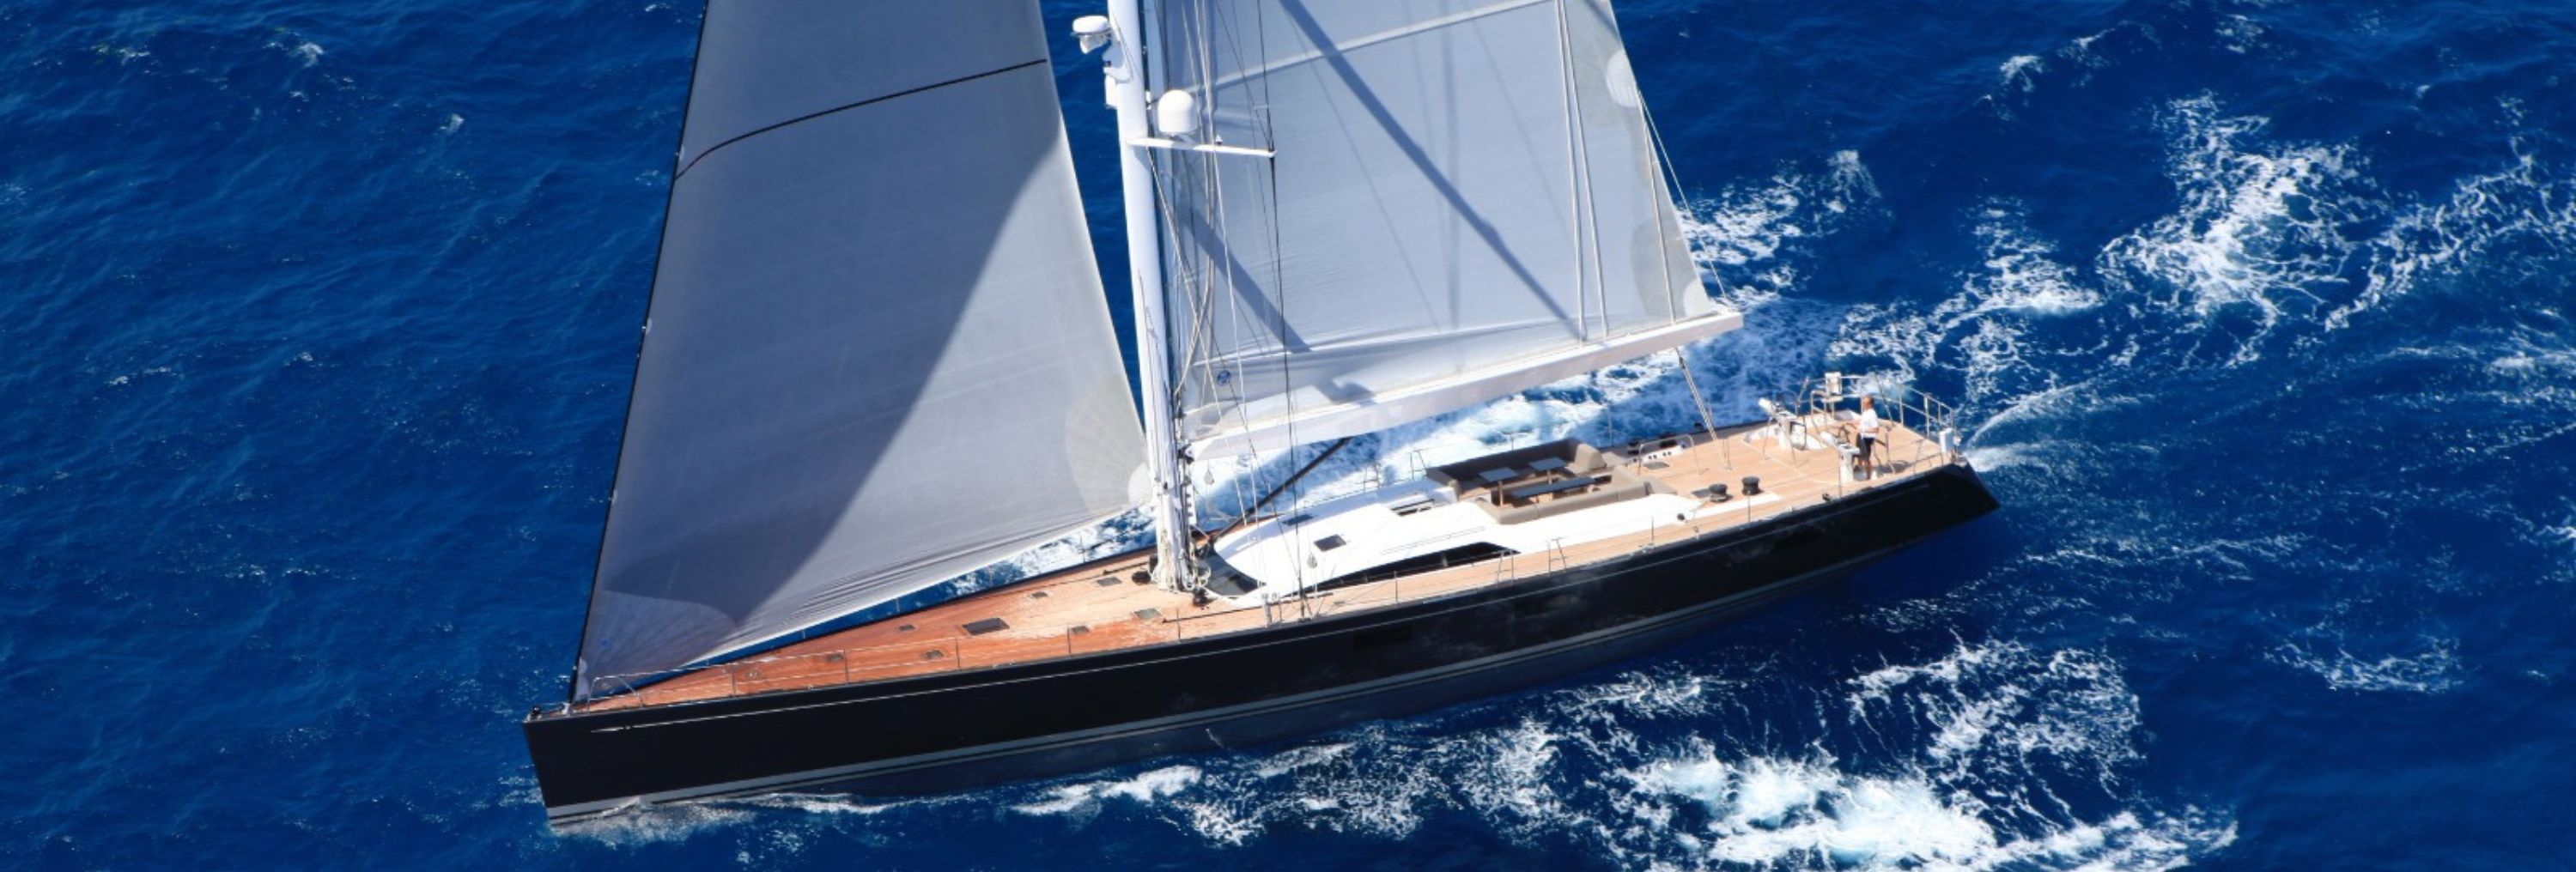 YCH2: New Sailing Yacht Available for Charters